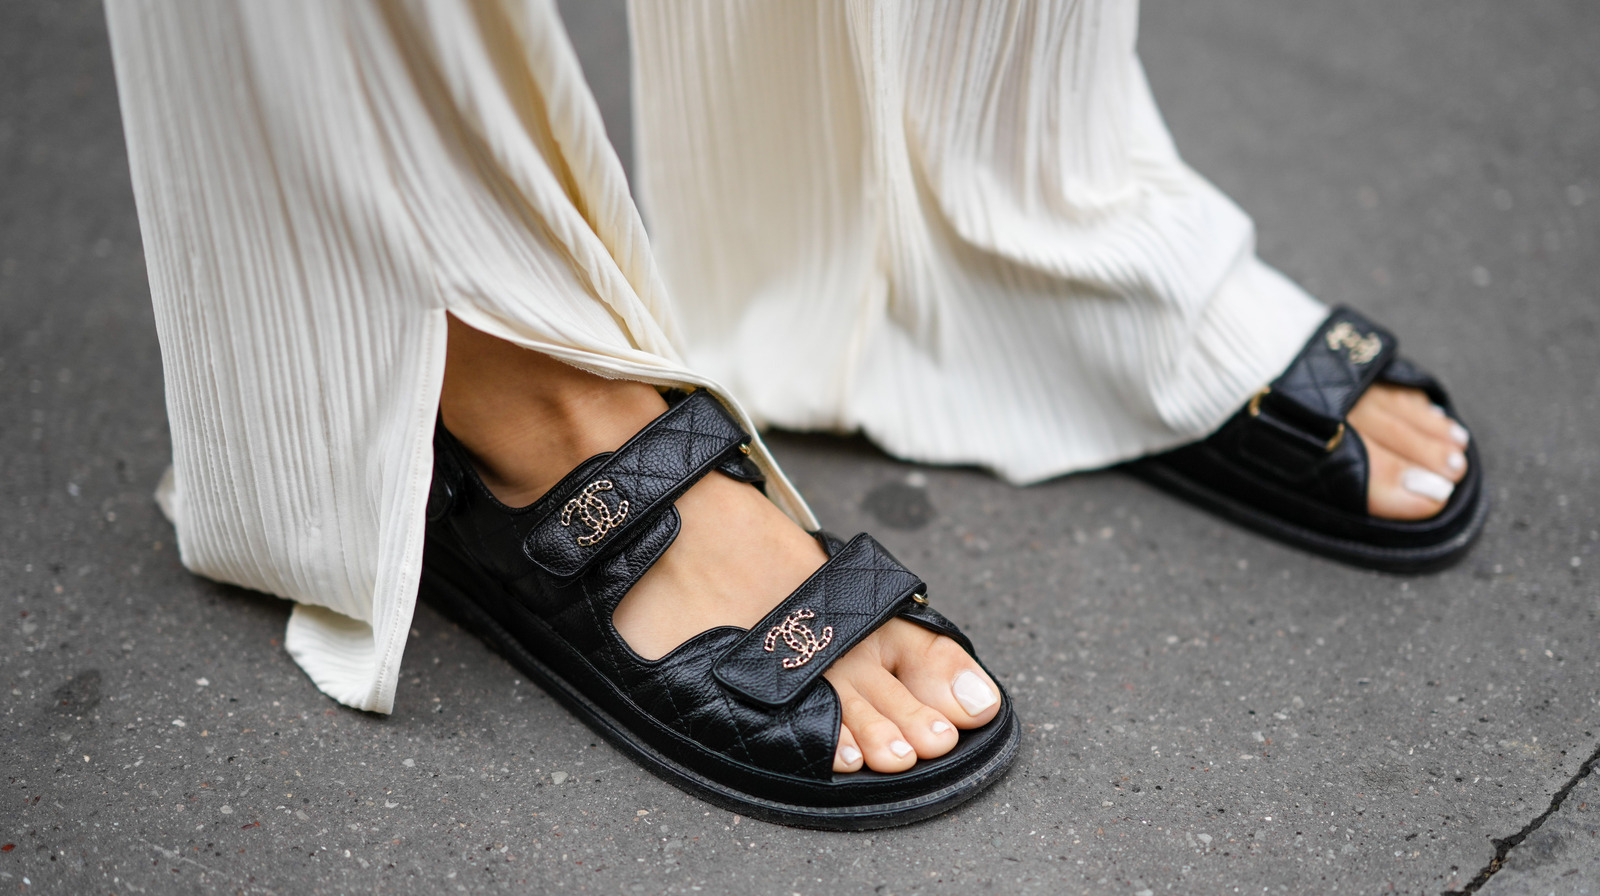 Blake Lively's Chanel Sandals Are A Twist On The Ugly Shoe Trend